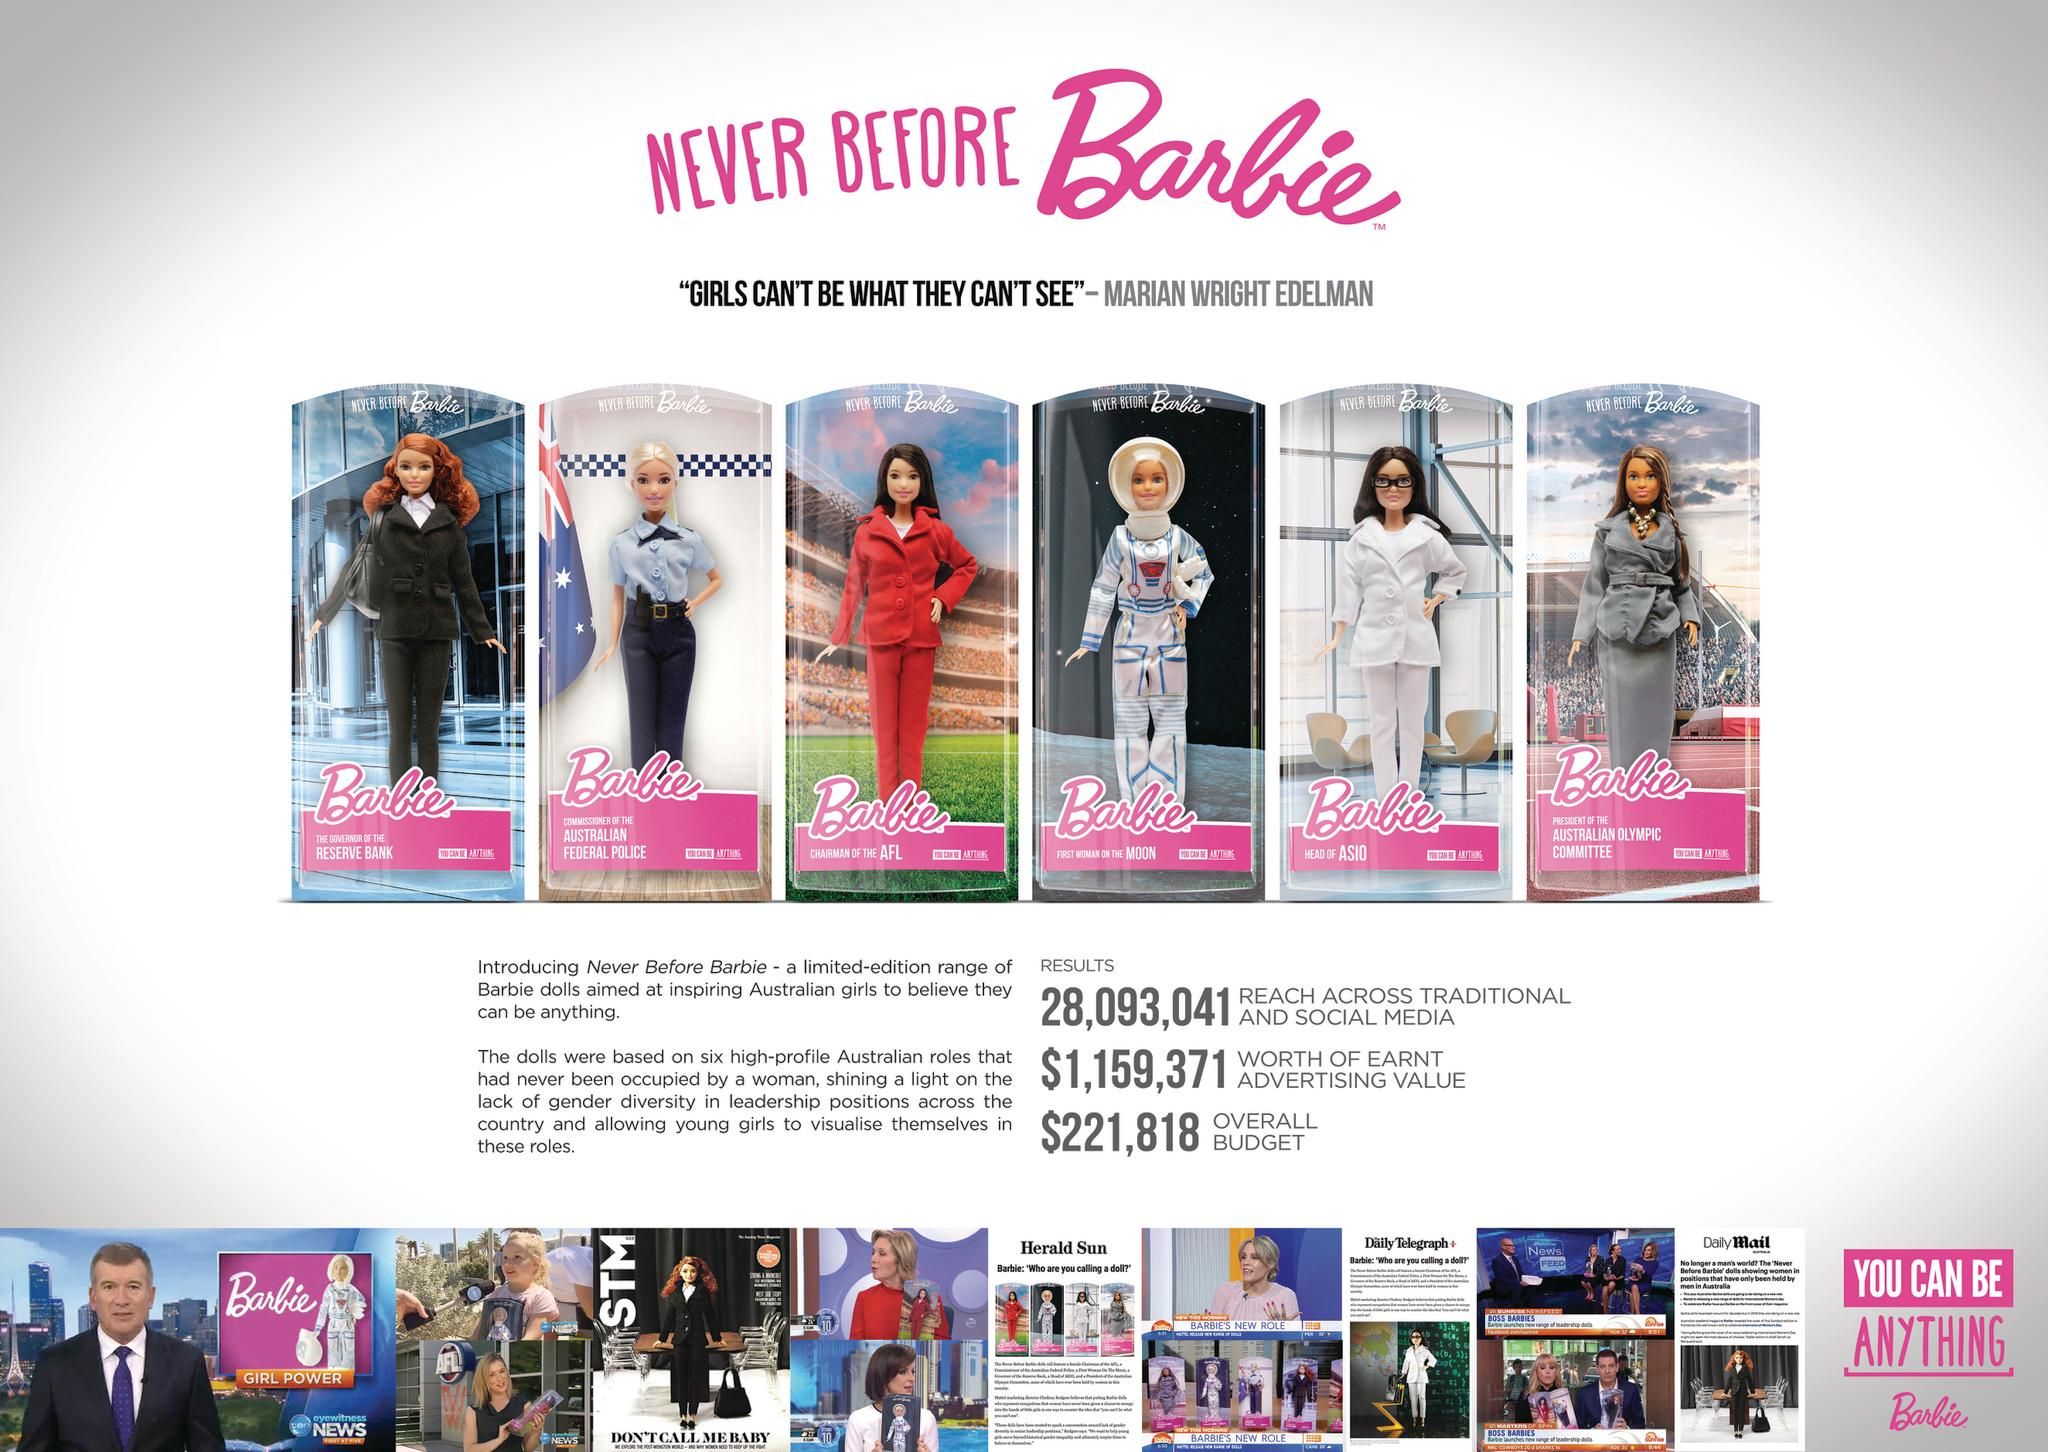 BARBIE - Never Before Barbie - BBDO - Cannes Lions 2018 Presentation Image from The Work - 415804-5041486